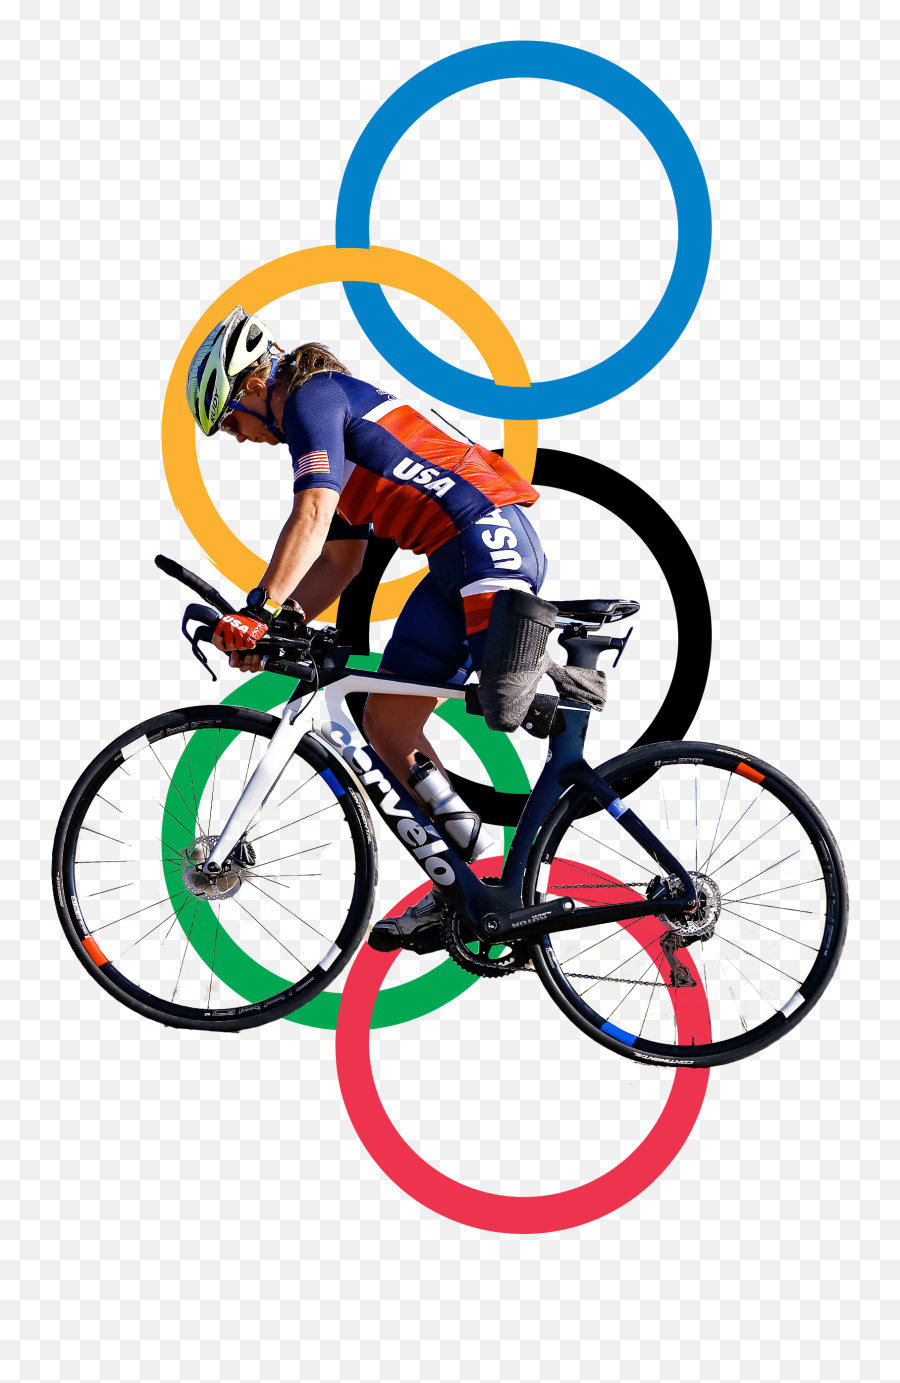 22 Lgbtq Olympic Athletes To Cheer For - Racing Bicycle Emoji,Luge Contestants Emotion